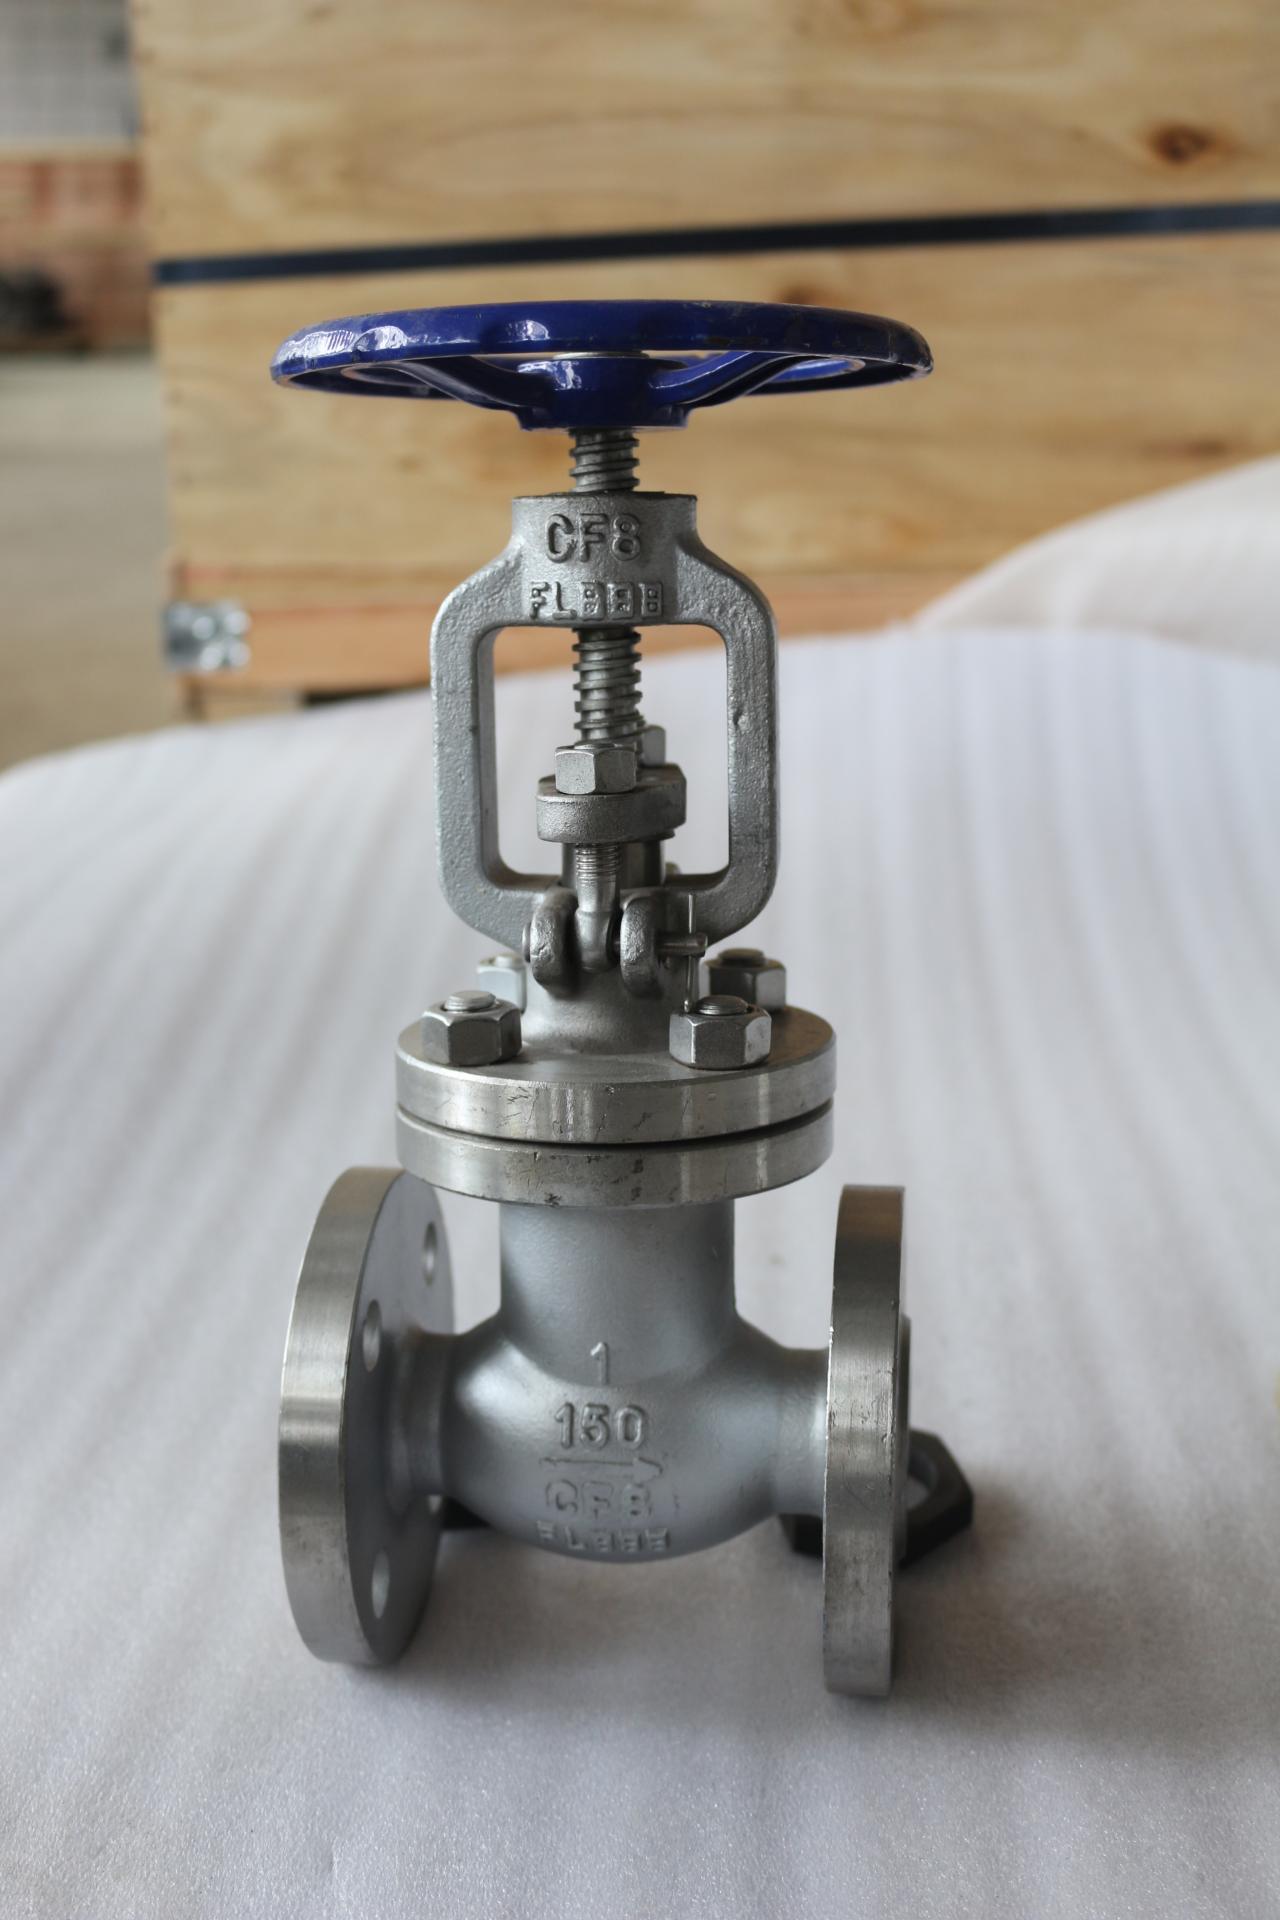 The introduction of globe valve